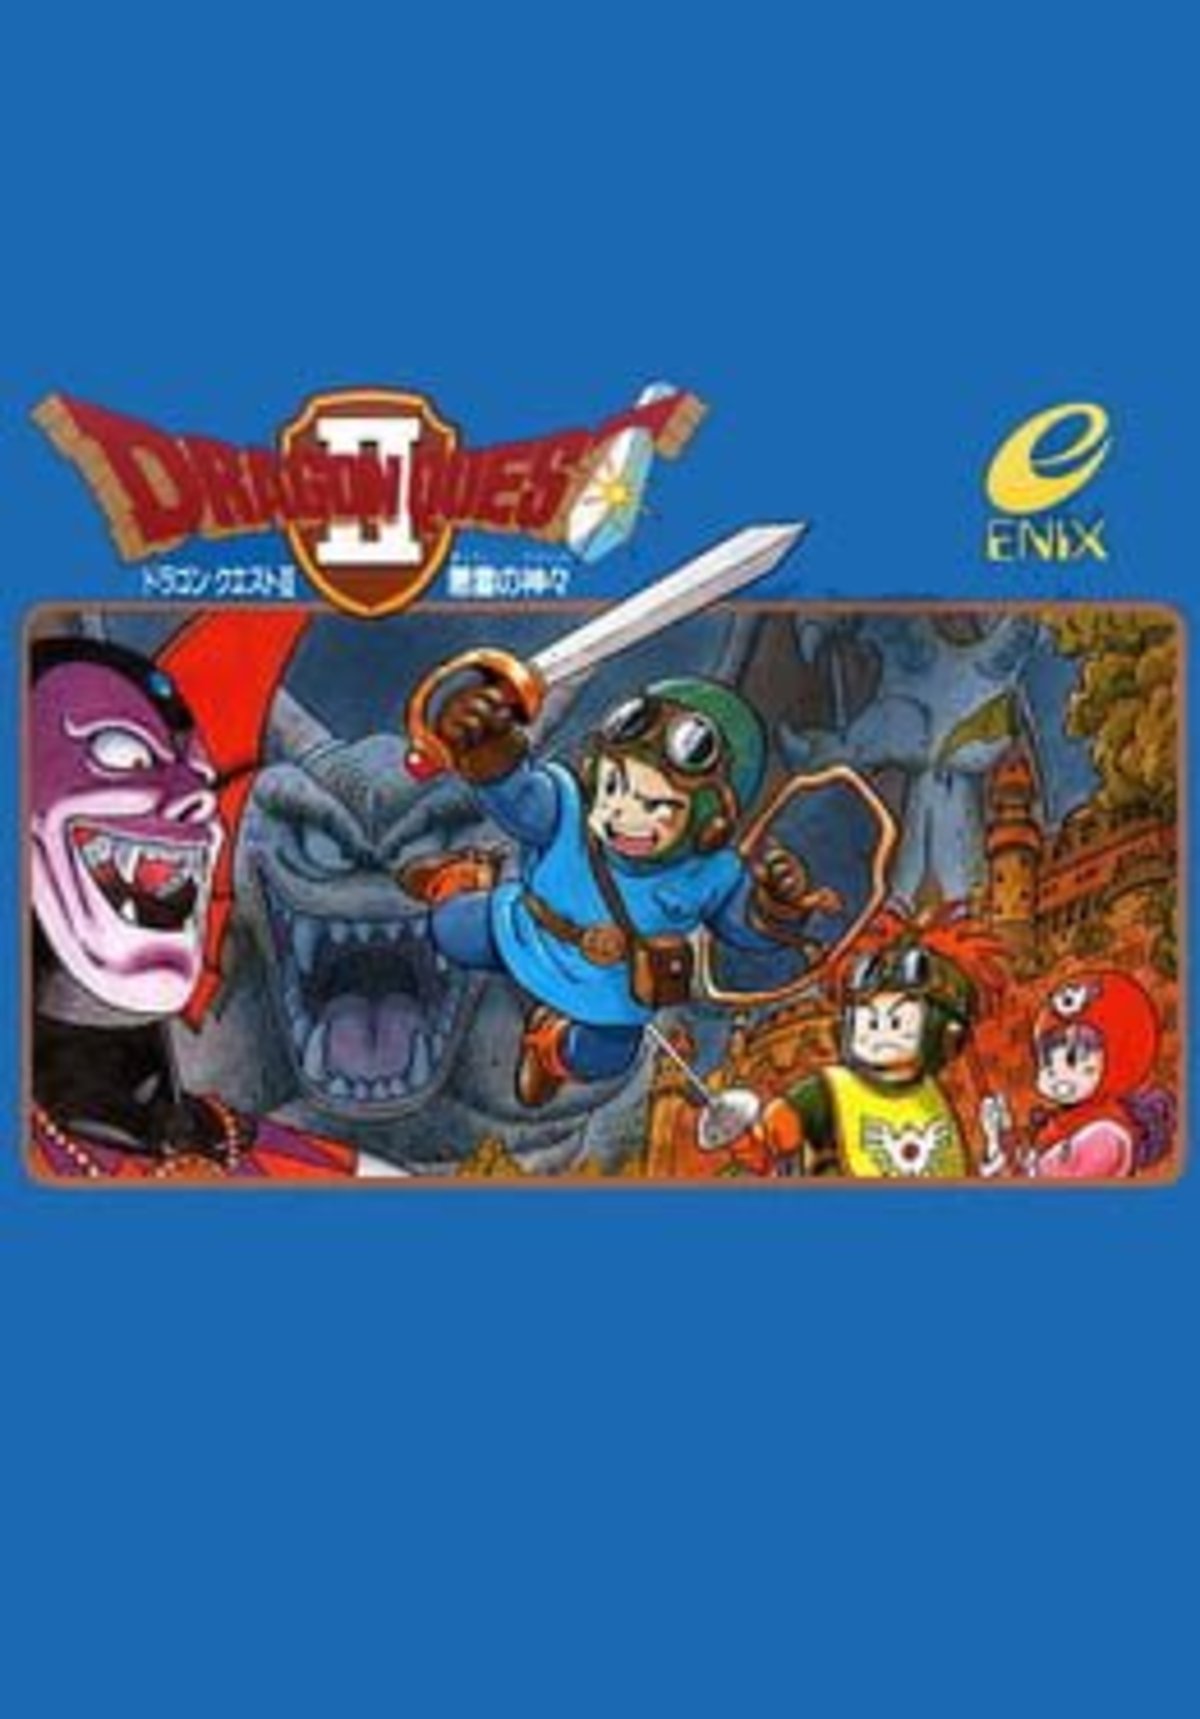 Dragon Quest II developers acknowledge that they never completed the game